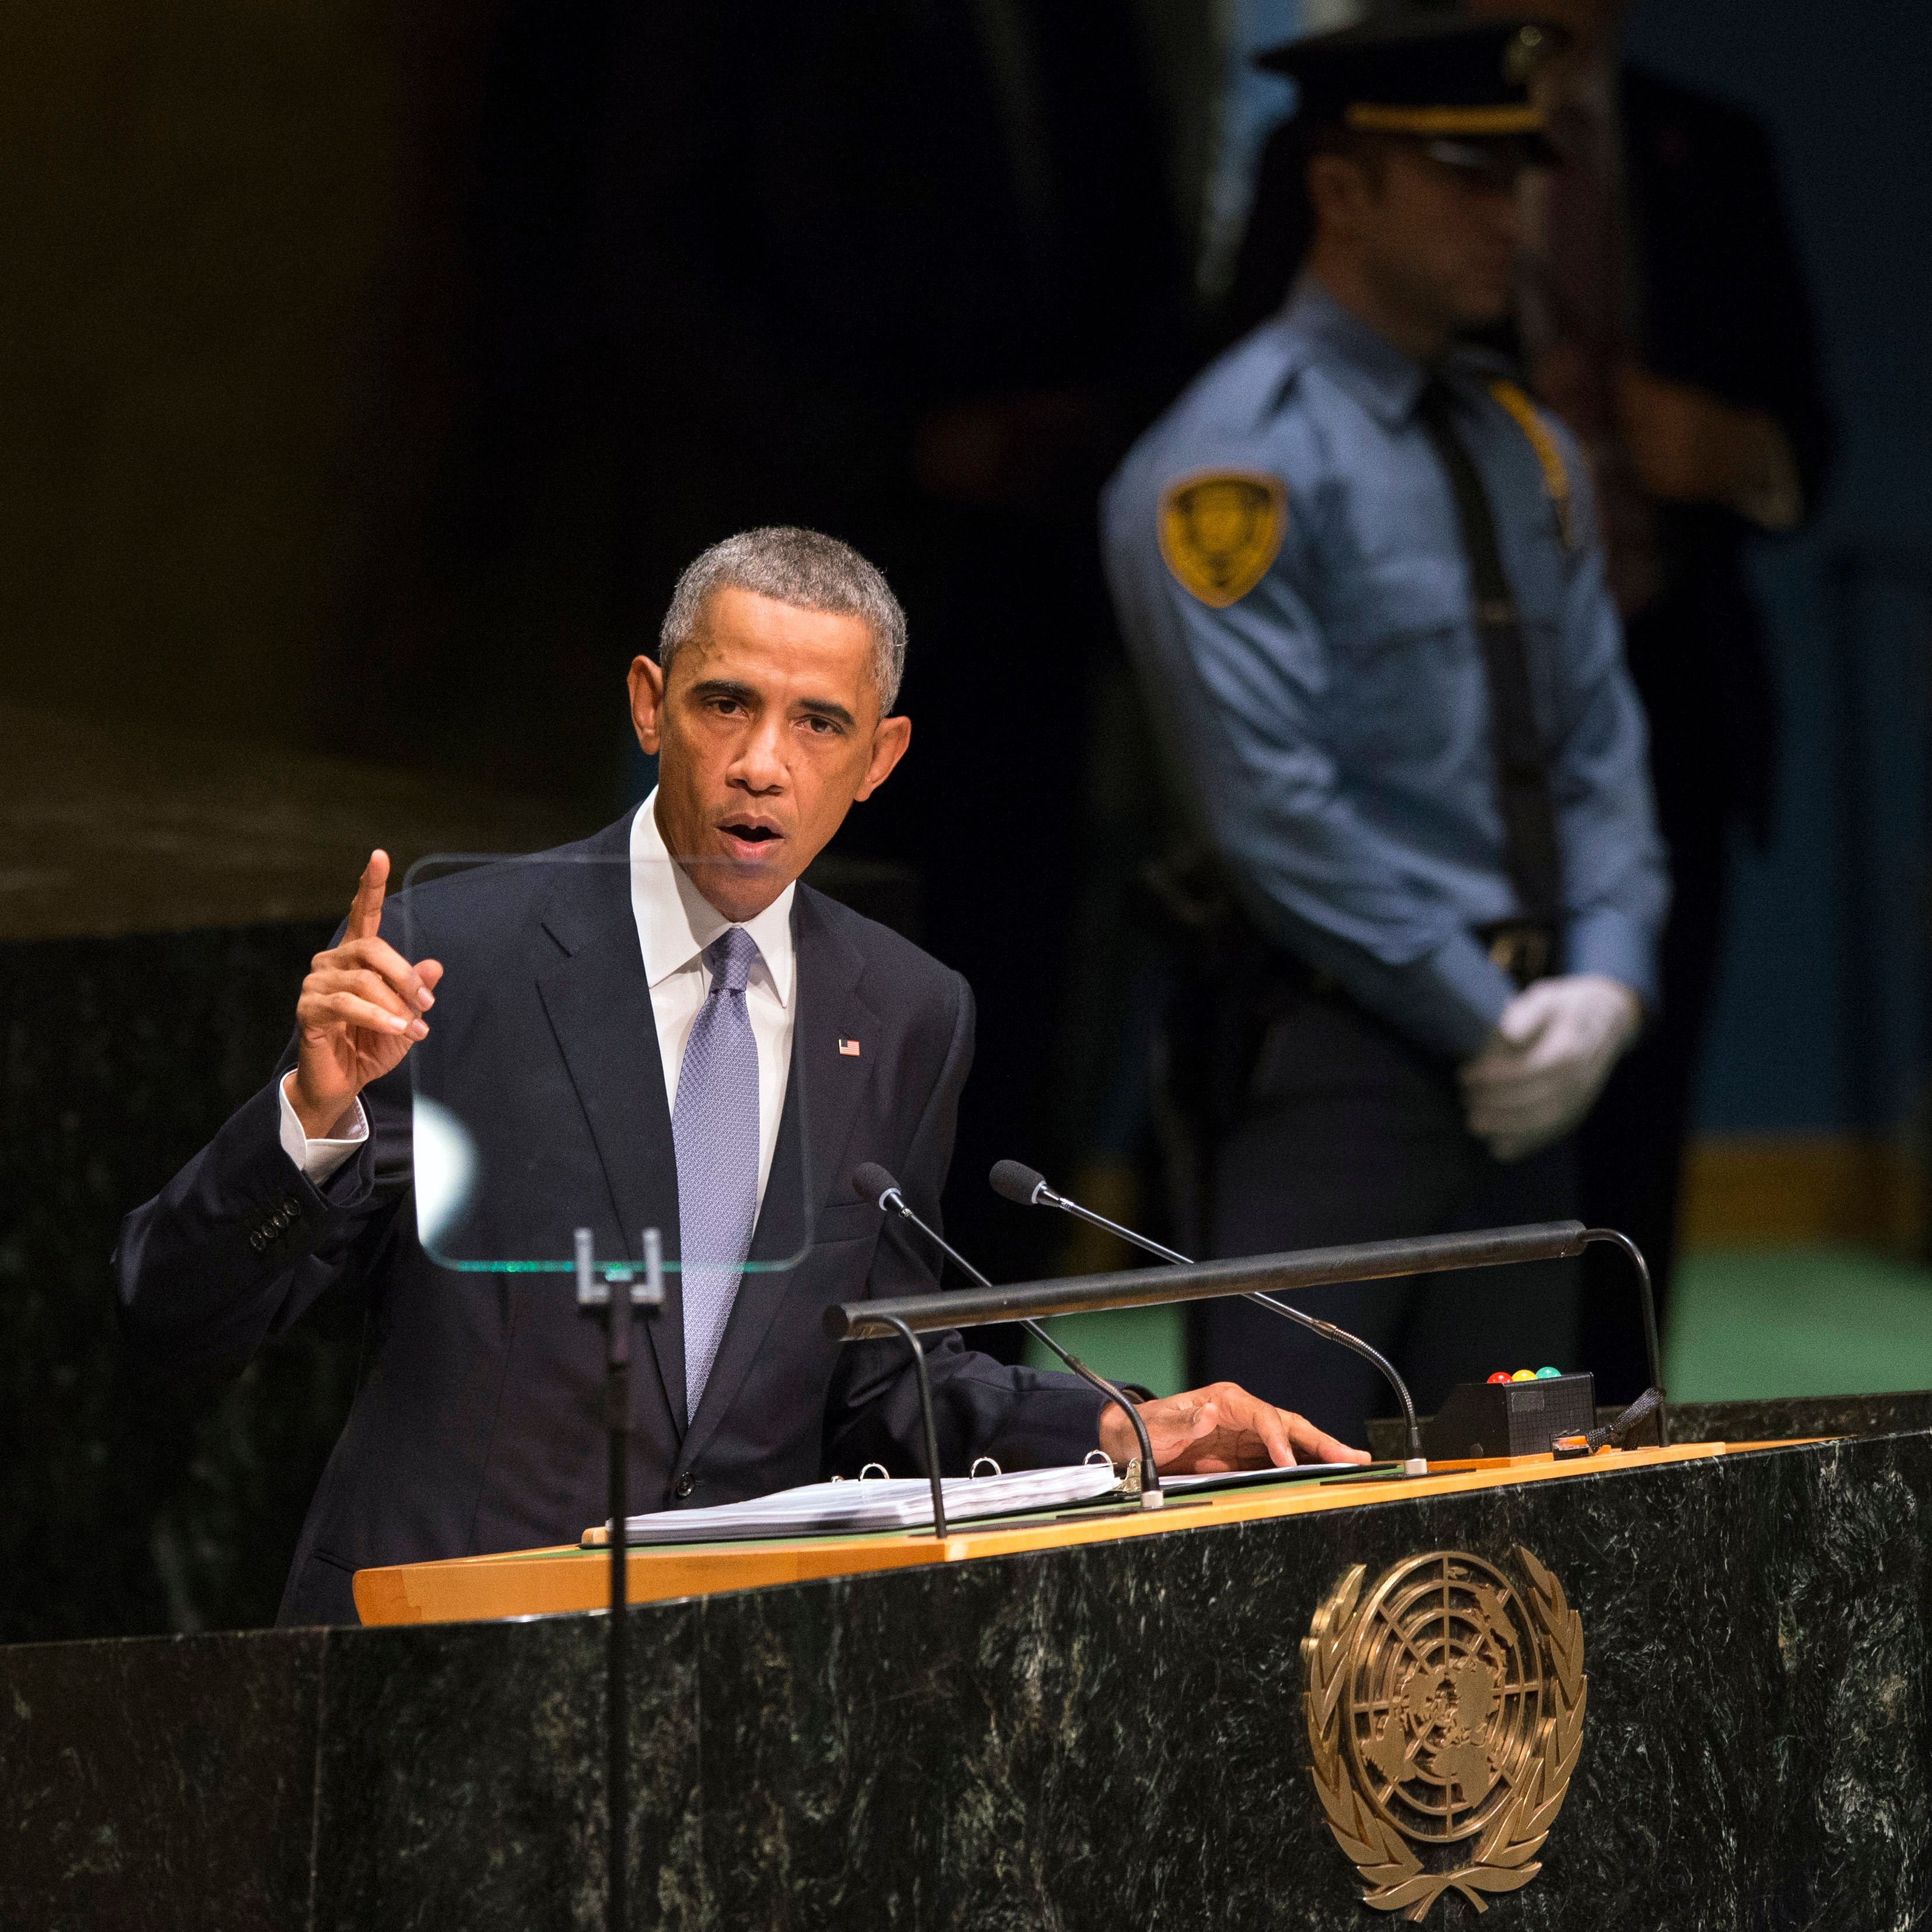 US President Barack Obama addresses the 69th United Nations General Assembly at the UN headquarters in New York September 24, 2014. Photo: Reuters